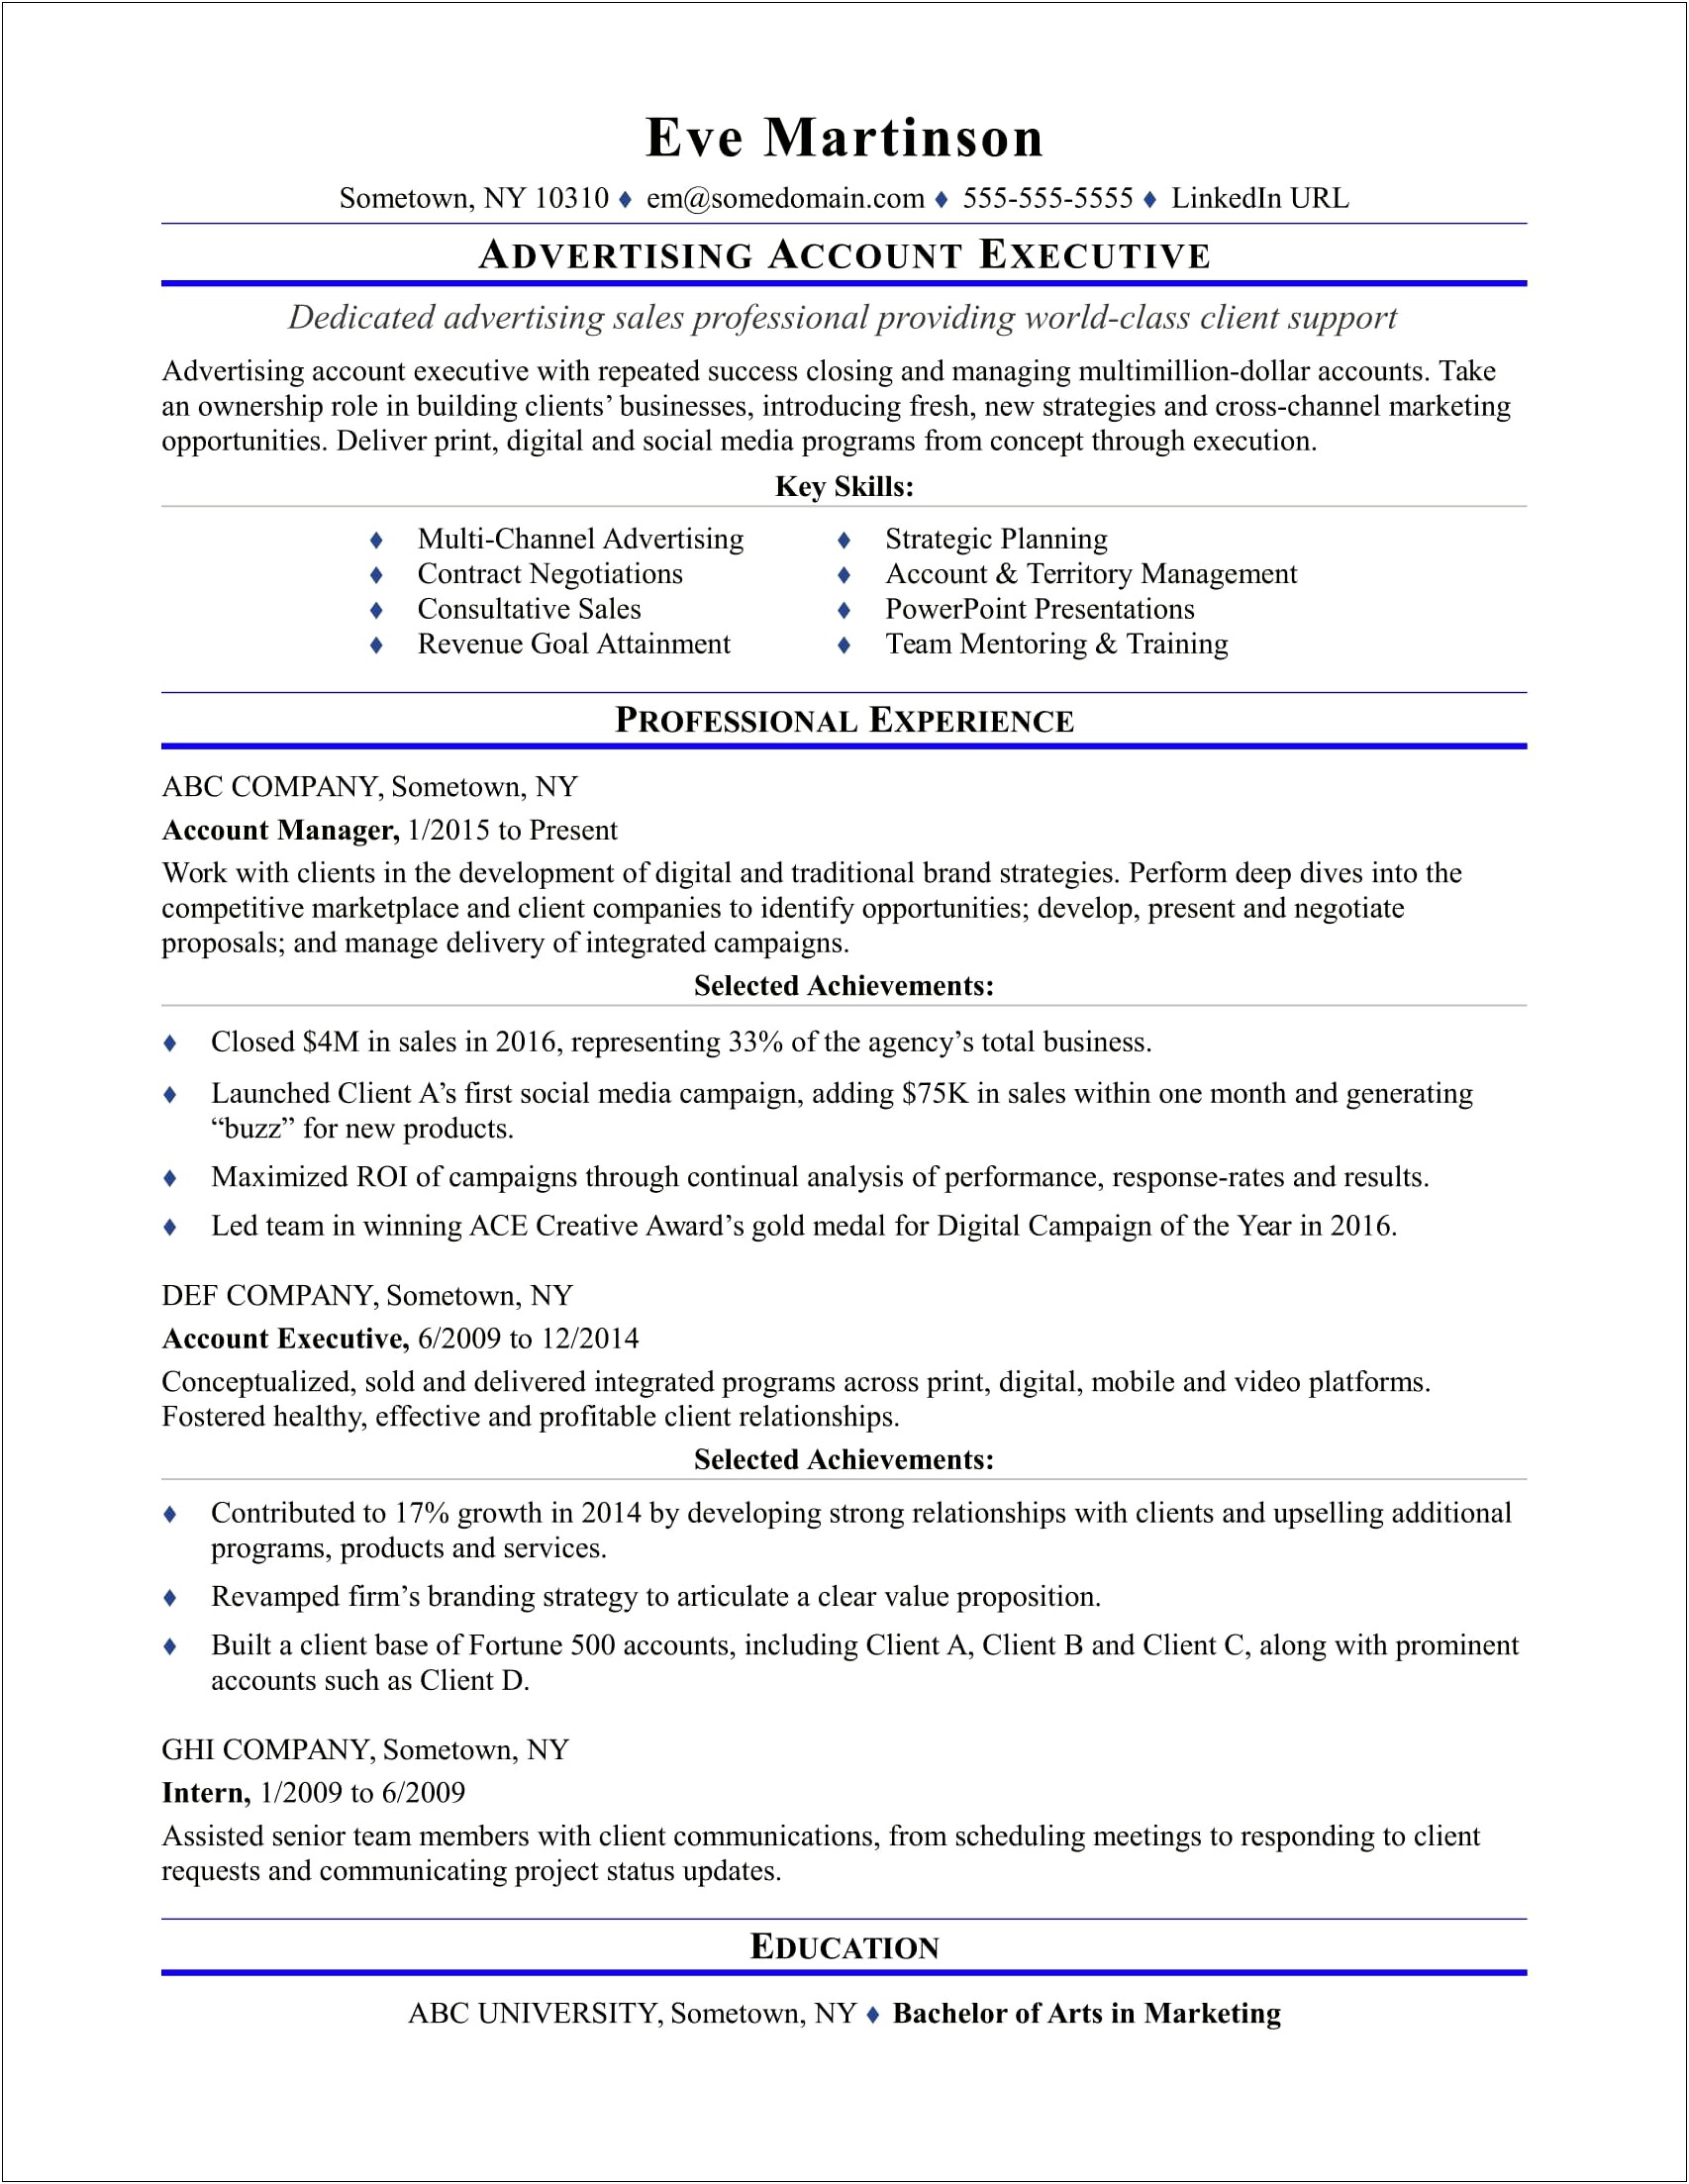 Resume Objective For Sales Account Manager